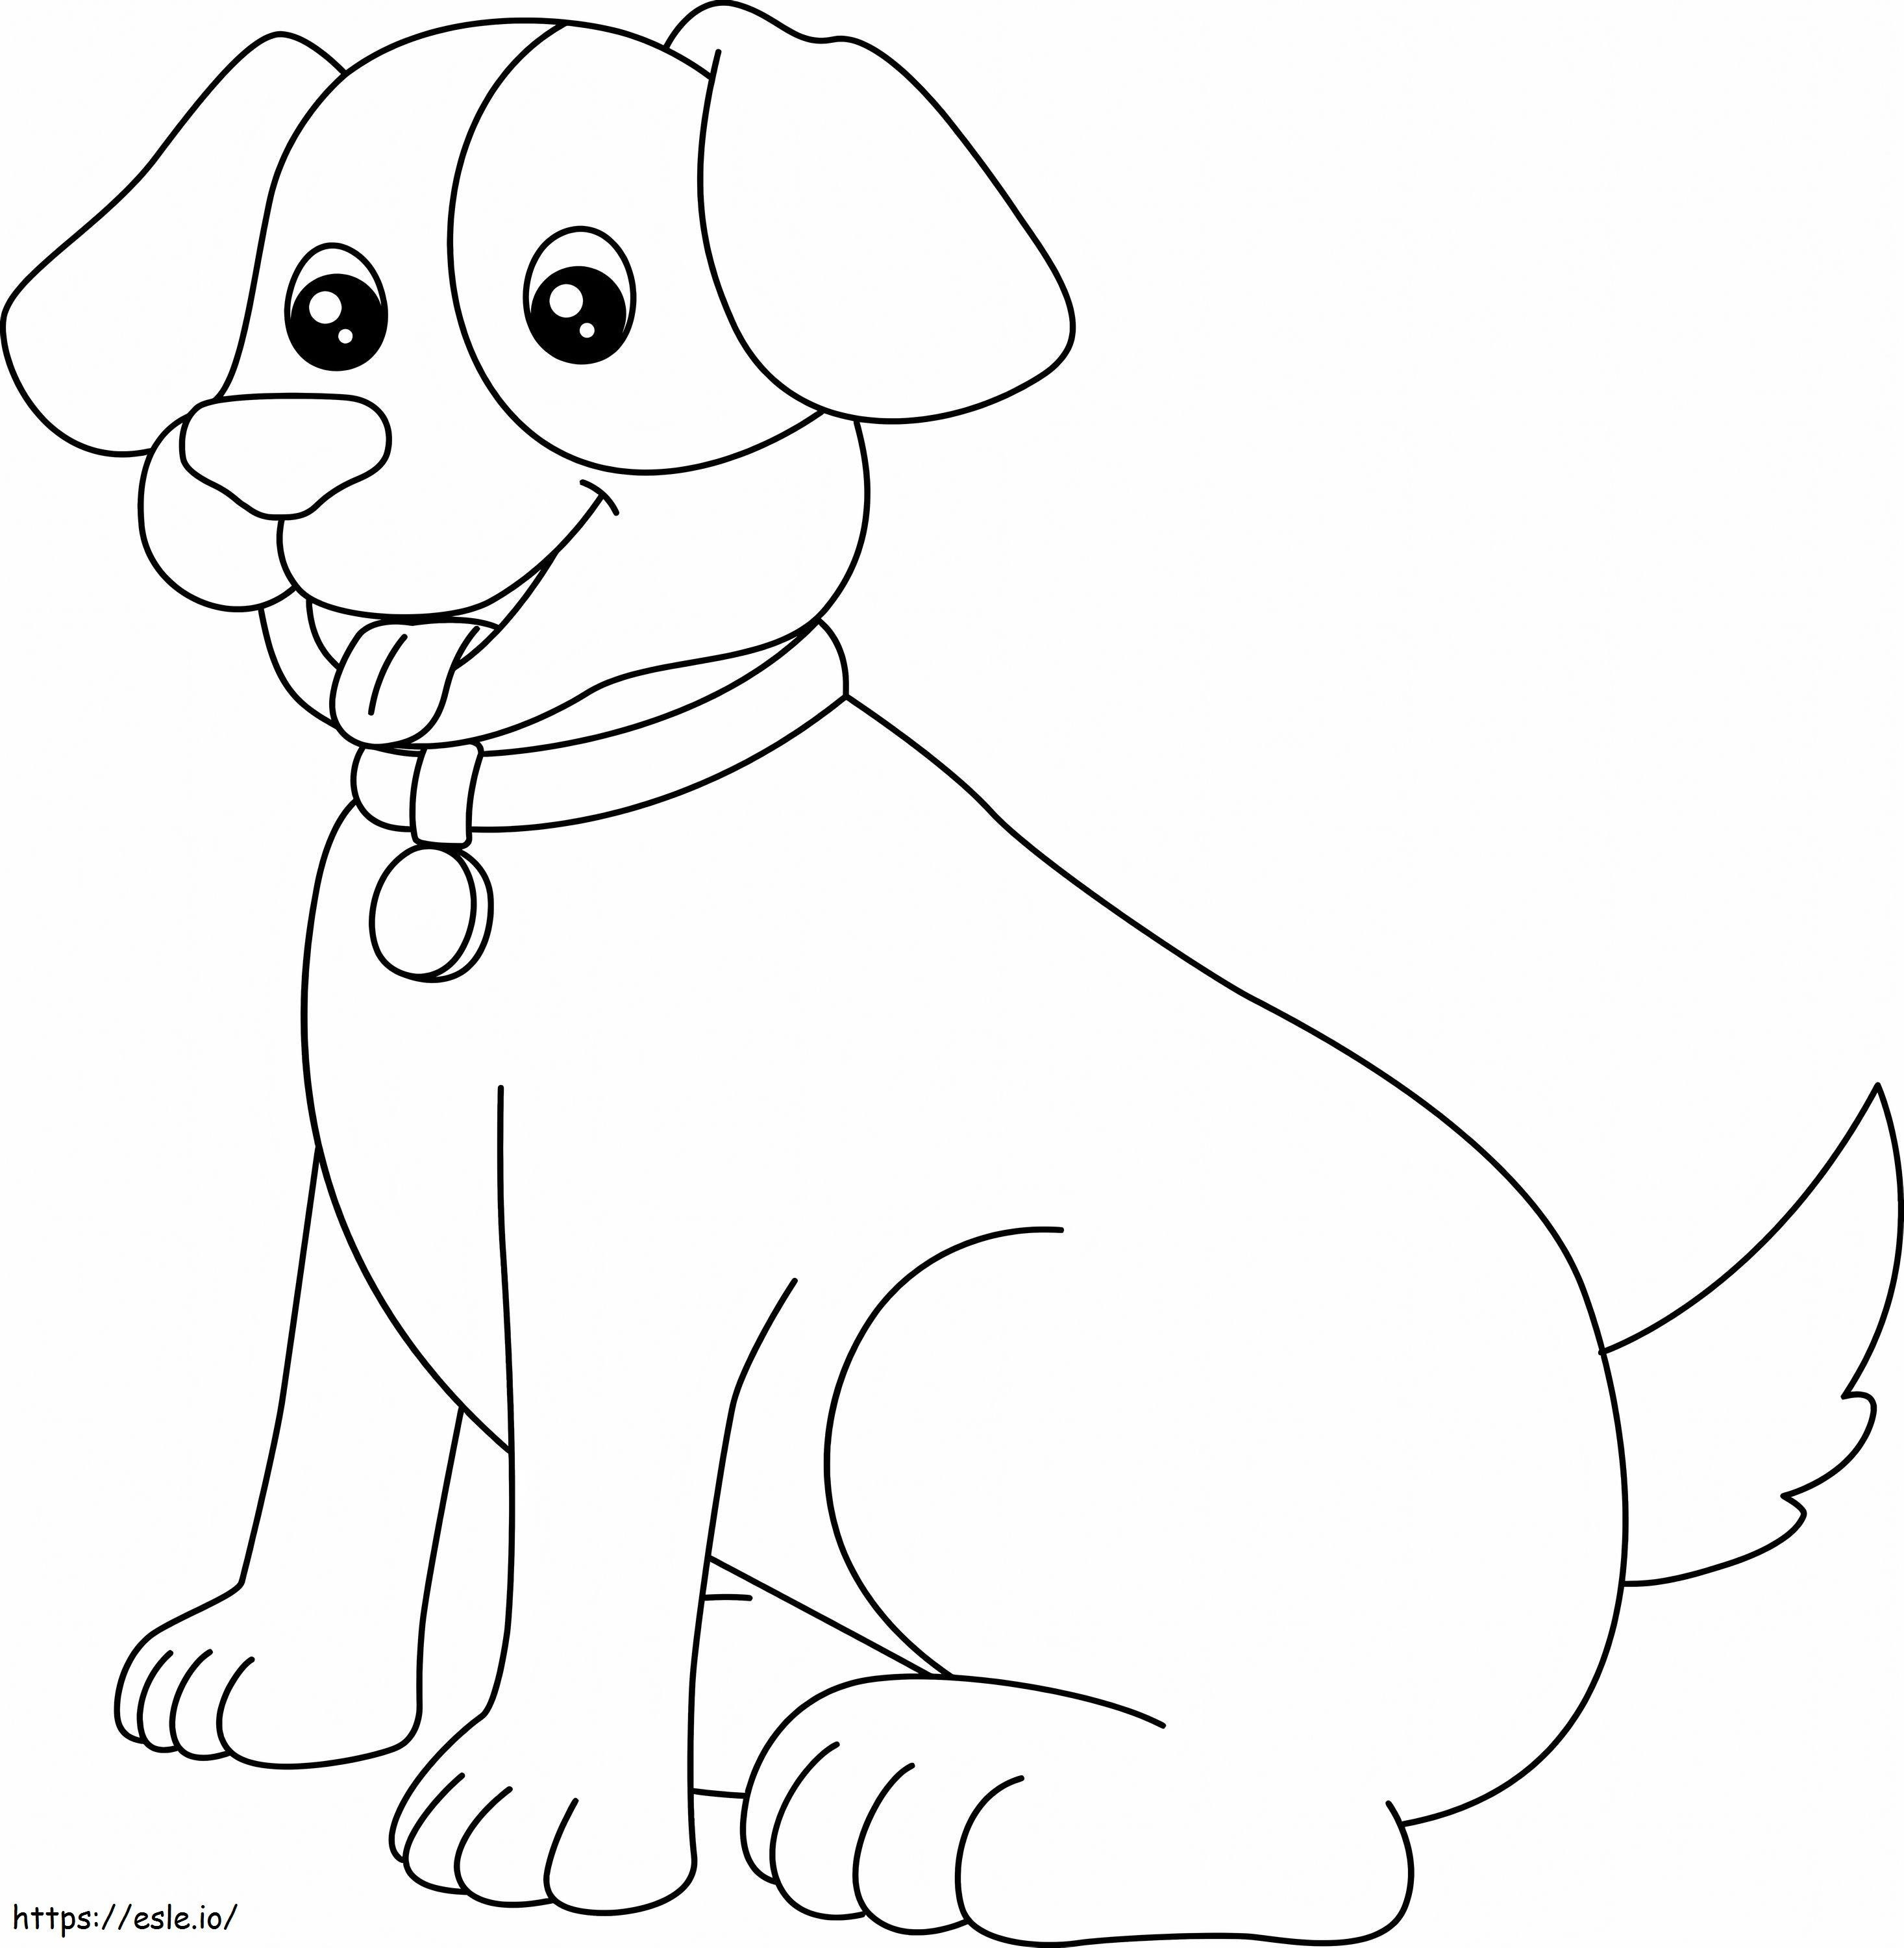 Funny Dog Sitting coloring page